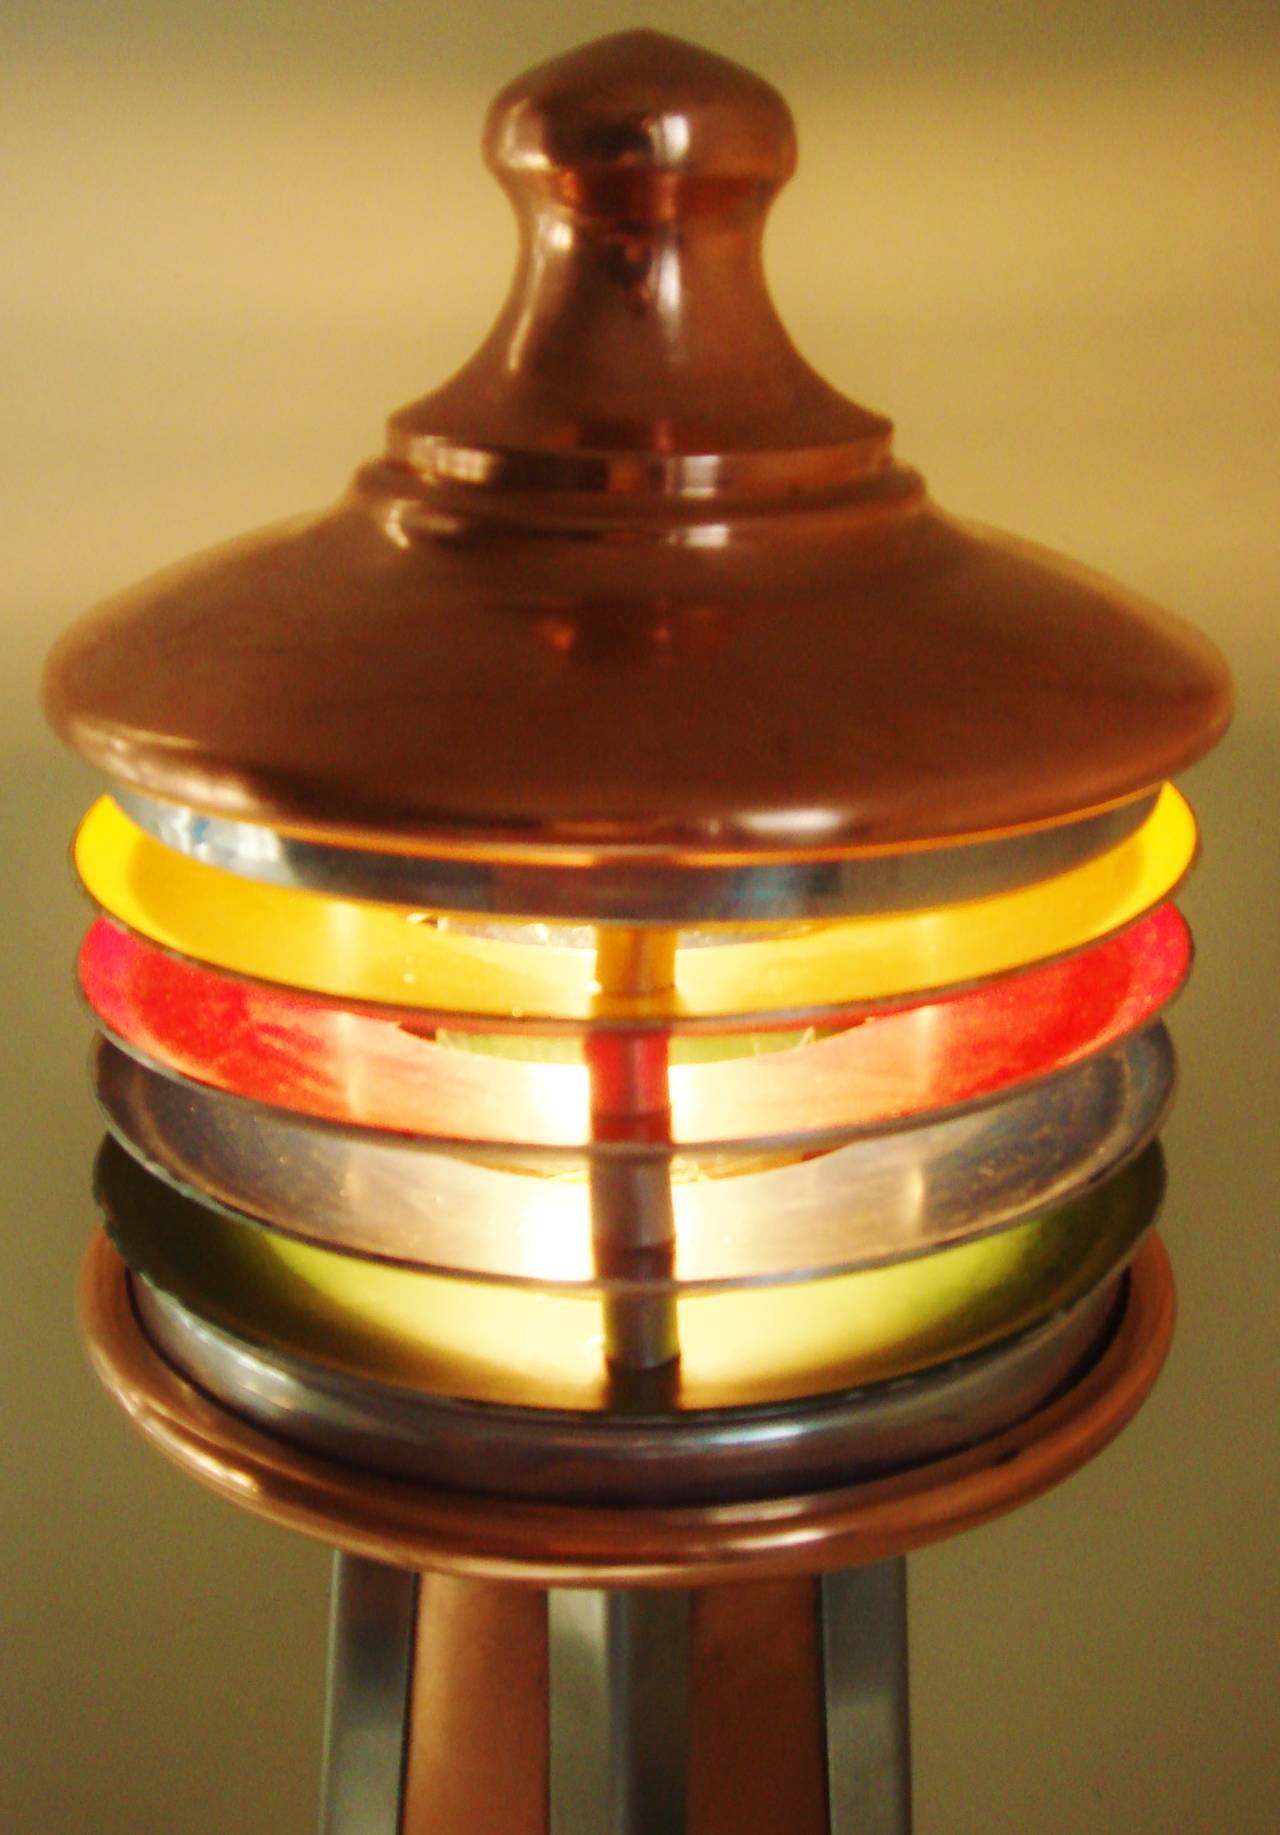 Mid-20th Century Art Deco or Machine Age Copper and Anodised Aluminium Lighthouse Table Lamp